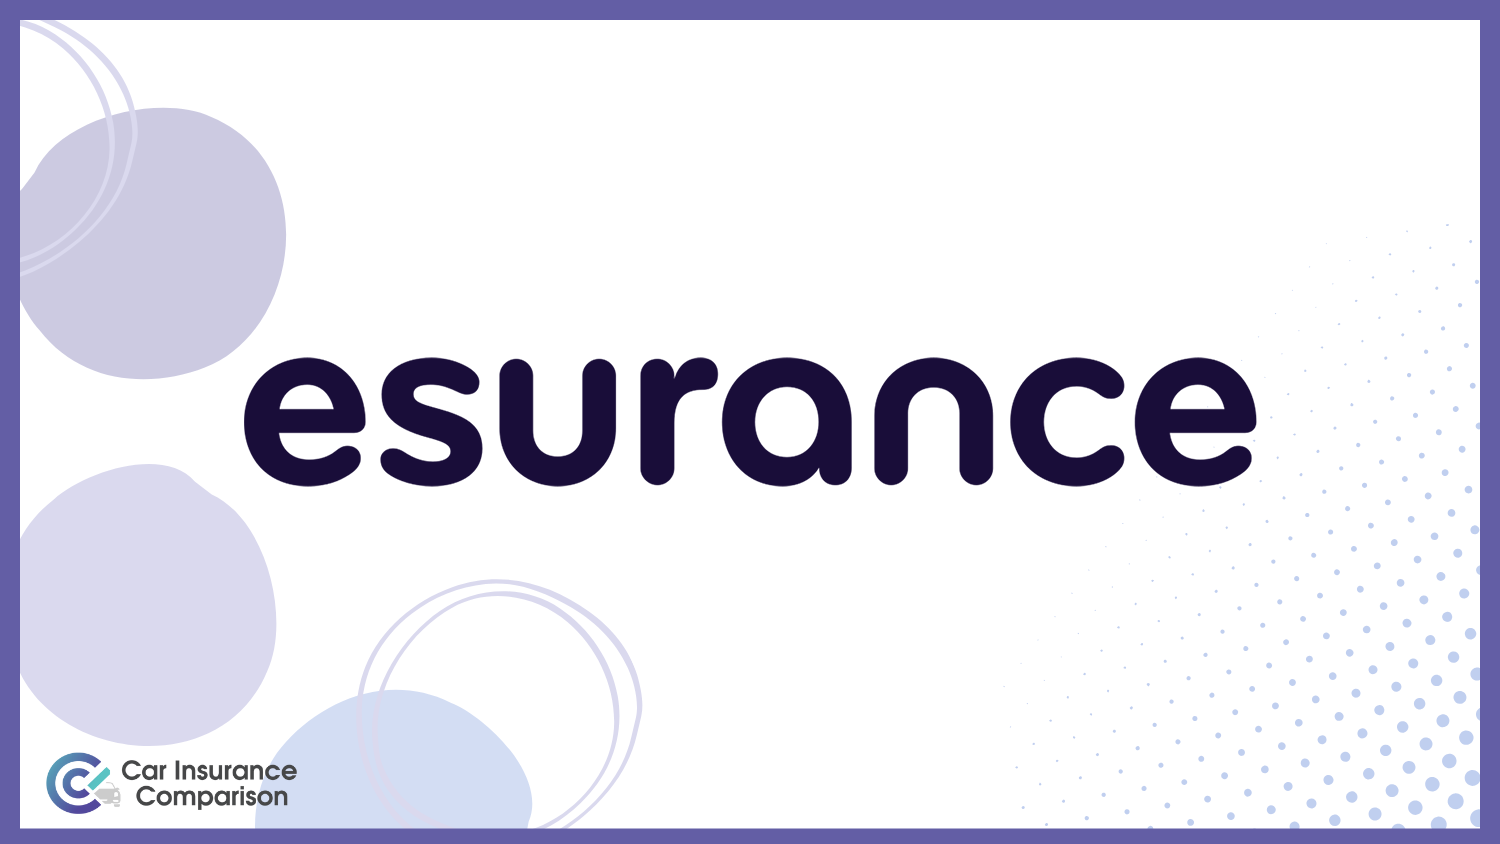 Esurance: Best Car Insurance for Real Estate Agents